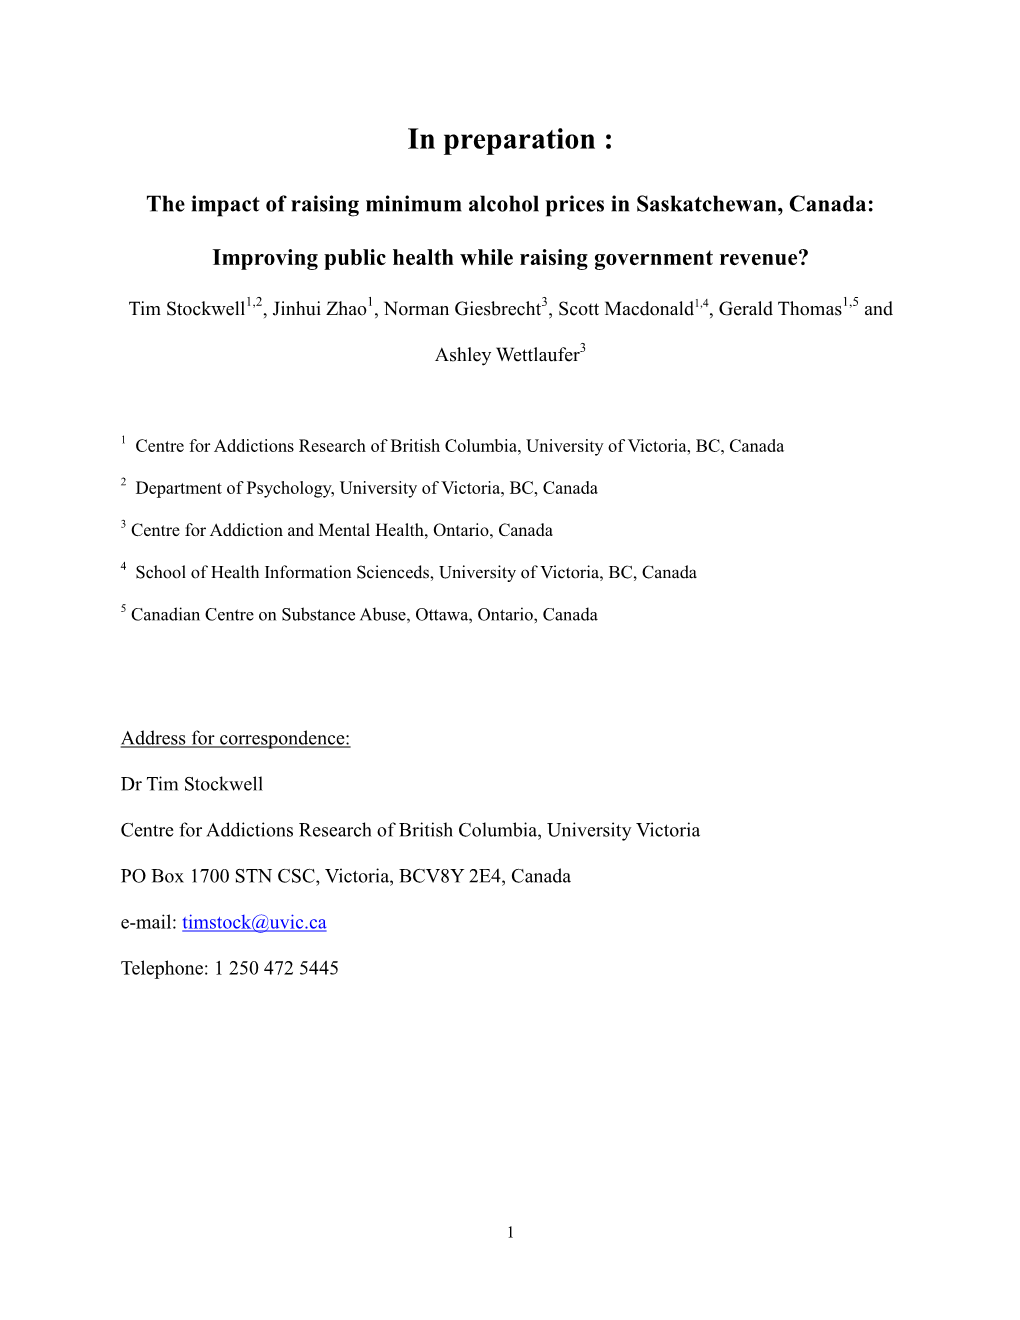 The Effect of Minimum Price Policing on Alcohol Consumption in Saskatchewan of Canada